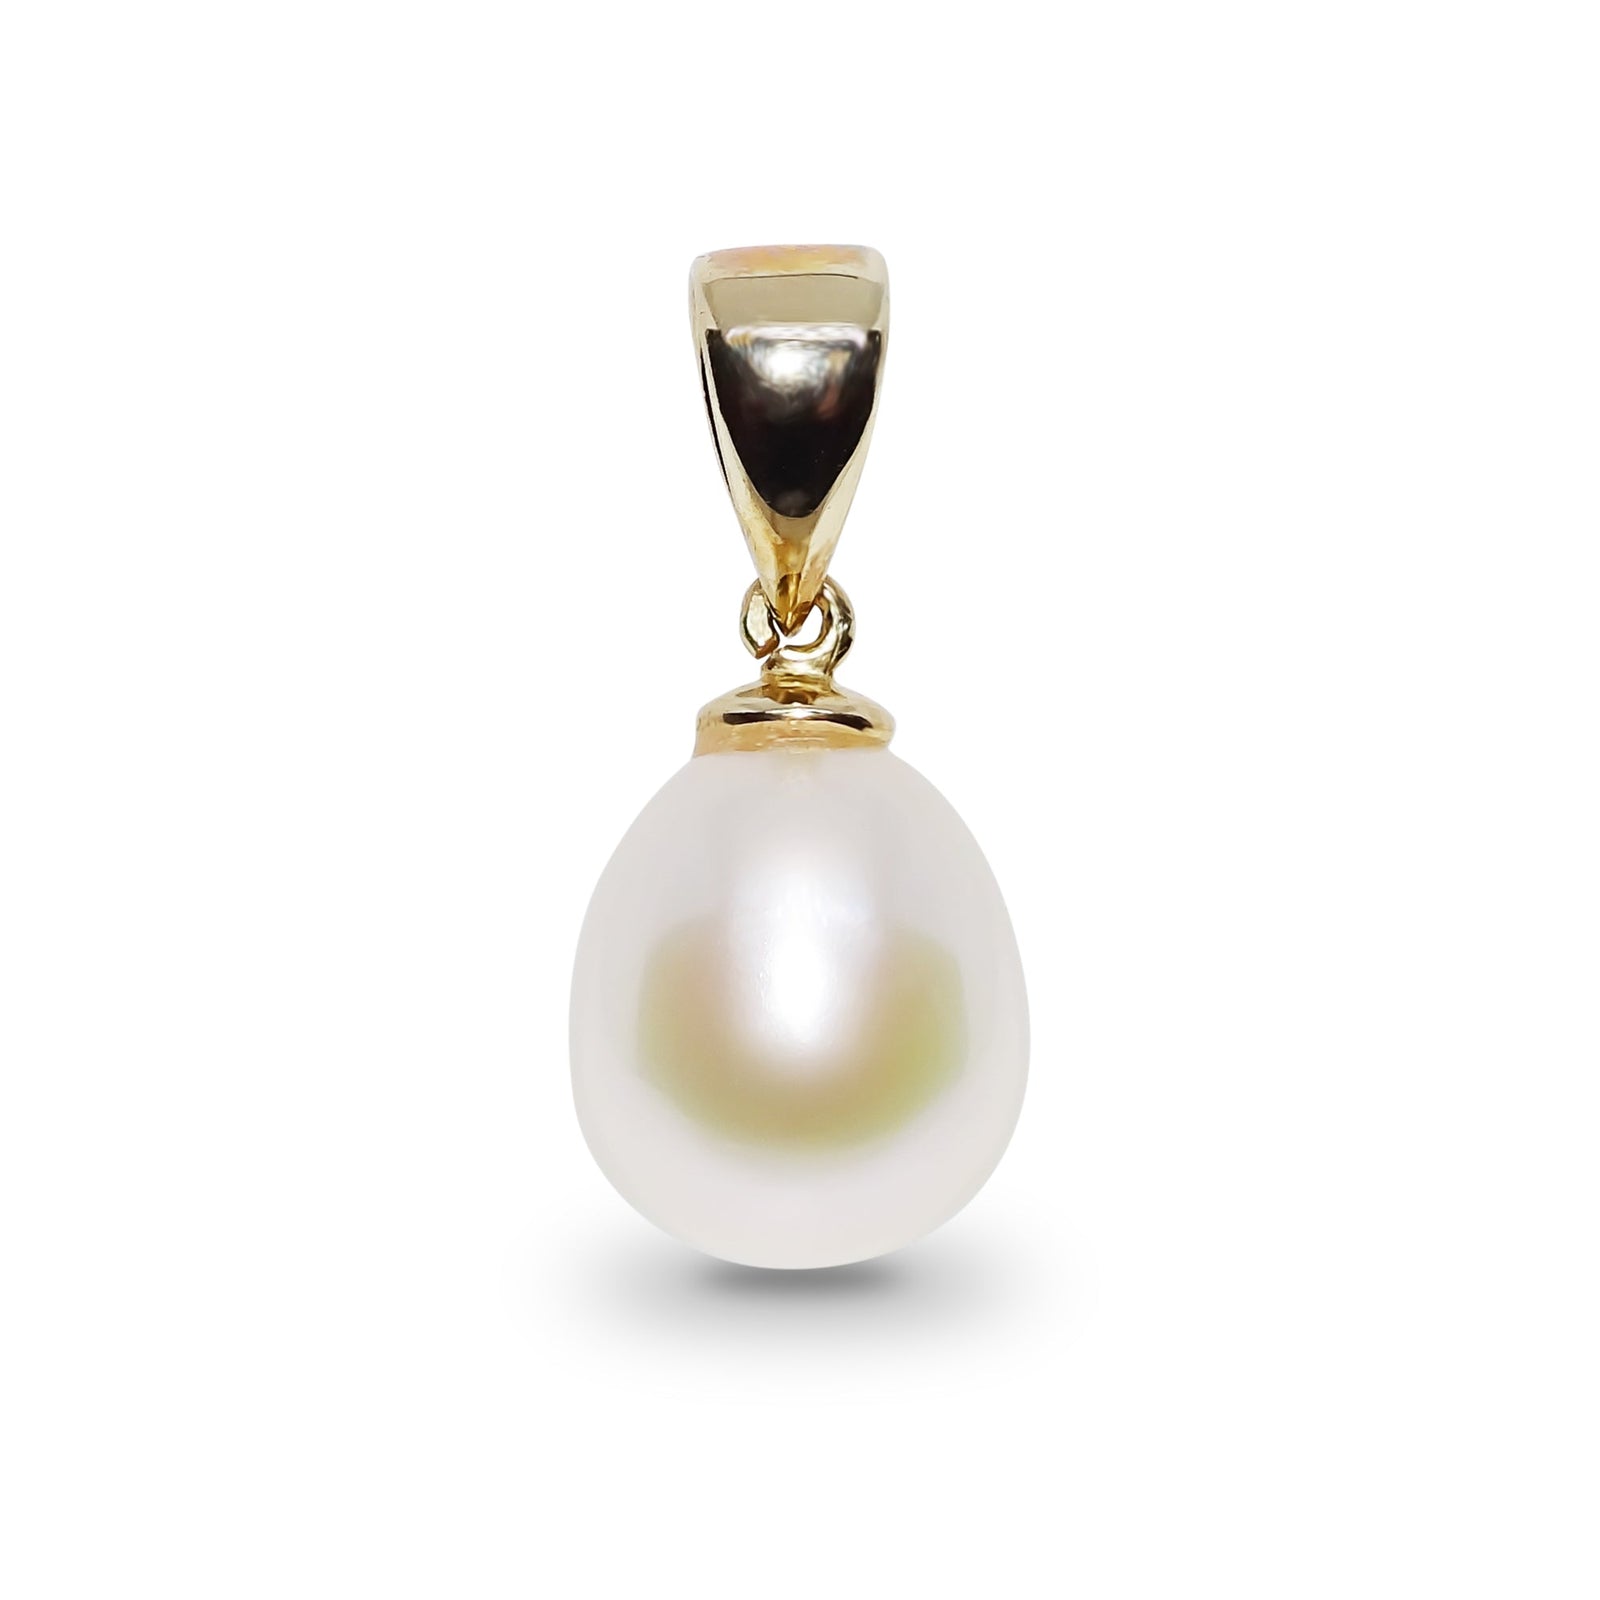 9ct gold 11x9mm freshwater pearl pendant